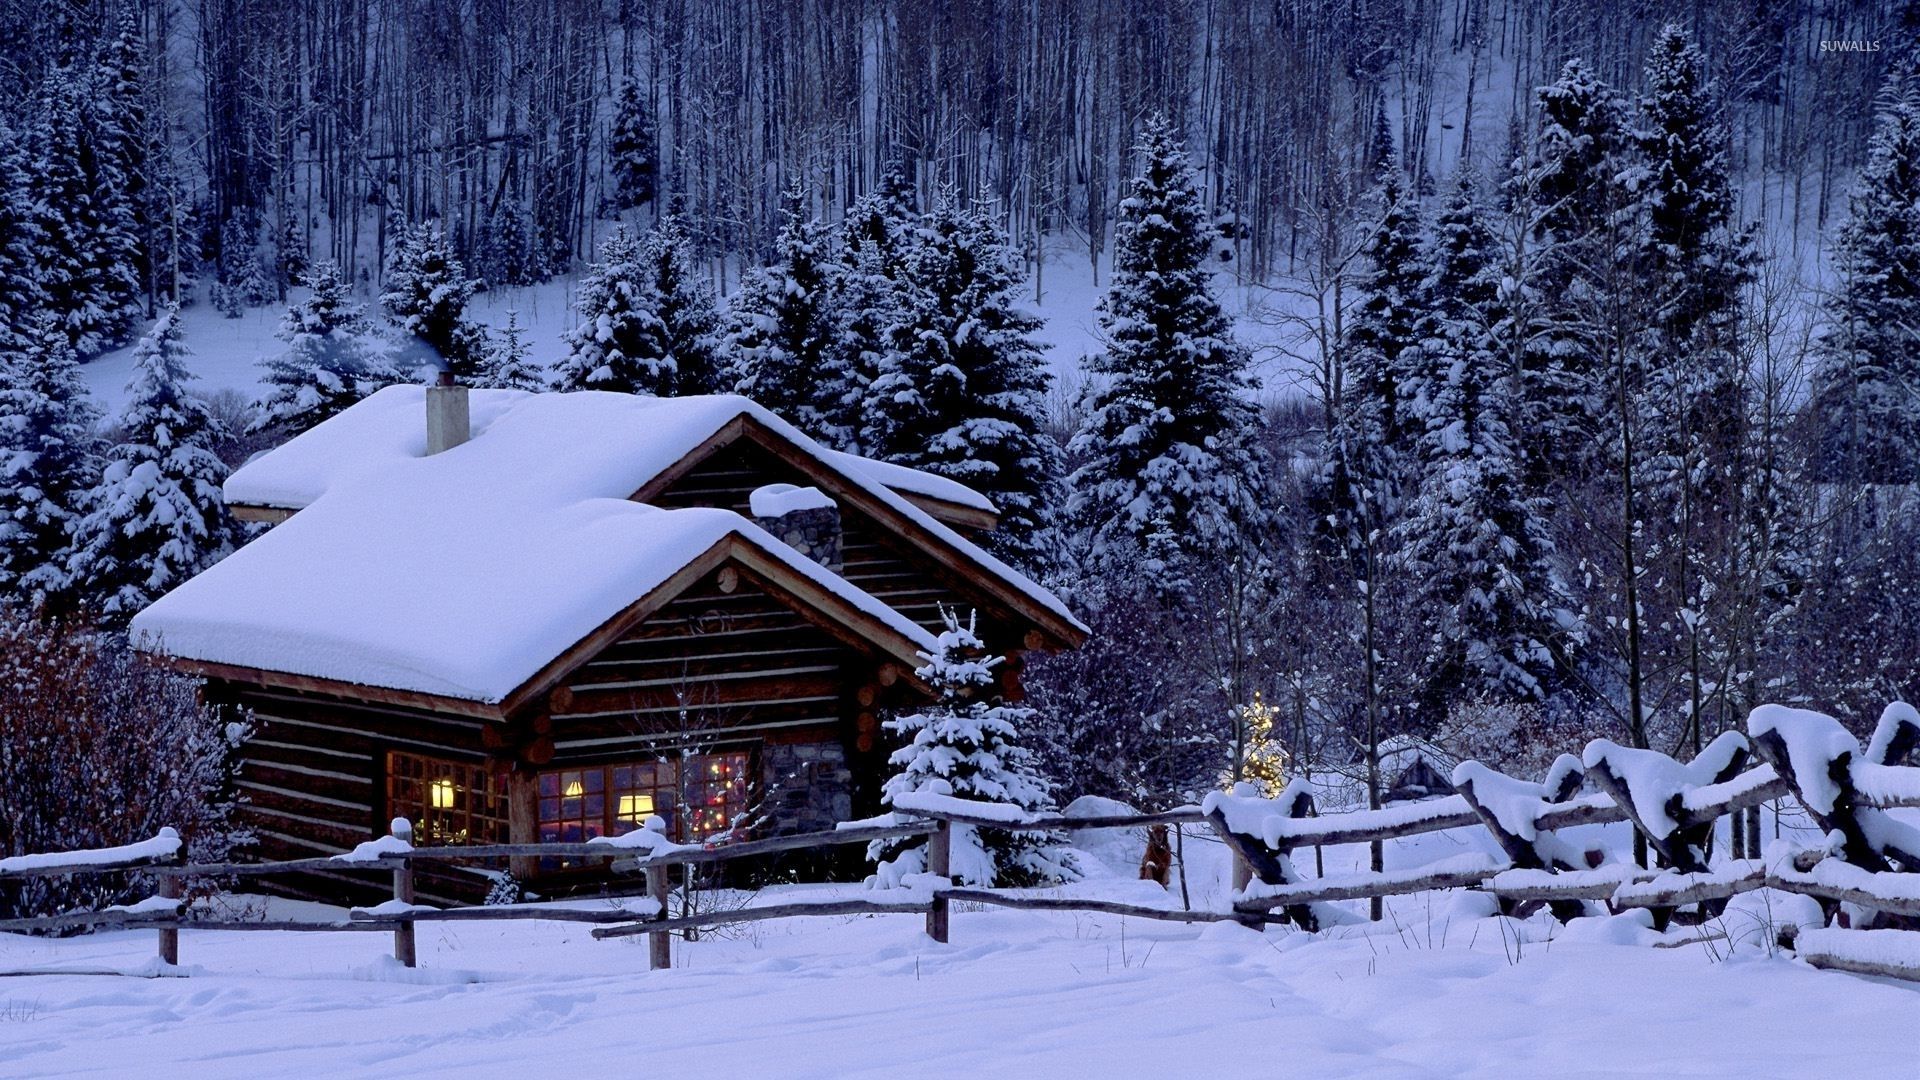 Christmas night in the forest wallpaper wallpaper